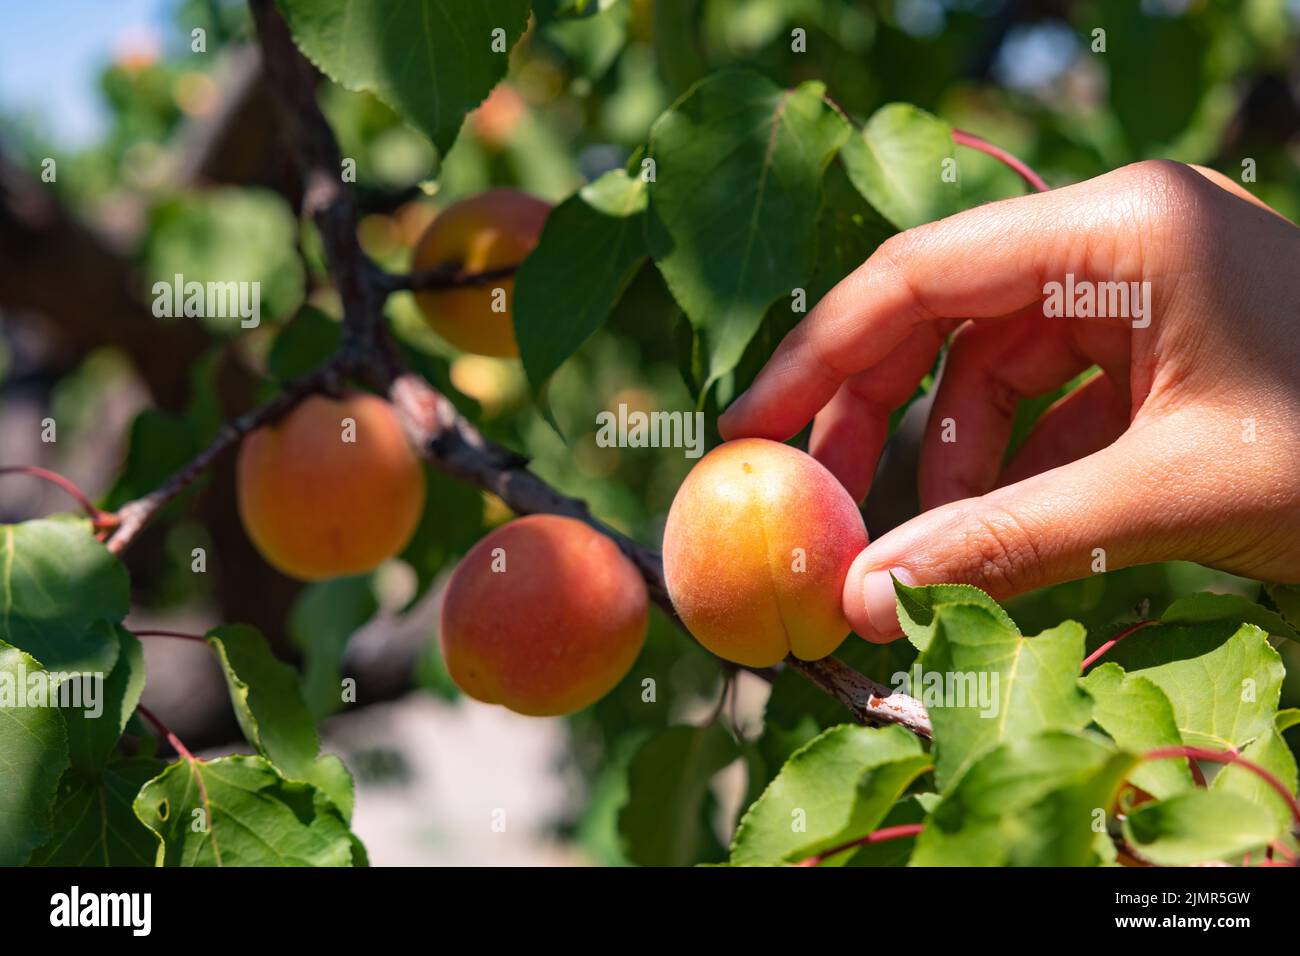 Picking or collecting or harvesting an apricot on the tree in summer. Apricot production background photo. Organic raw fruits. Stock Photo